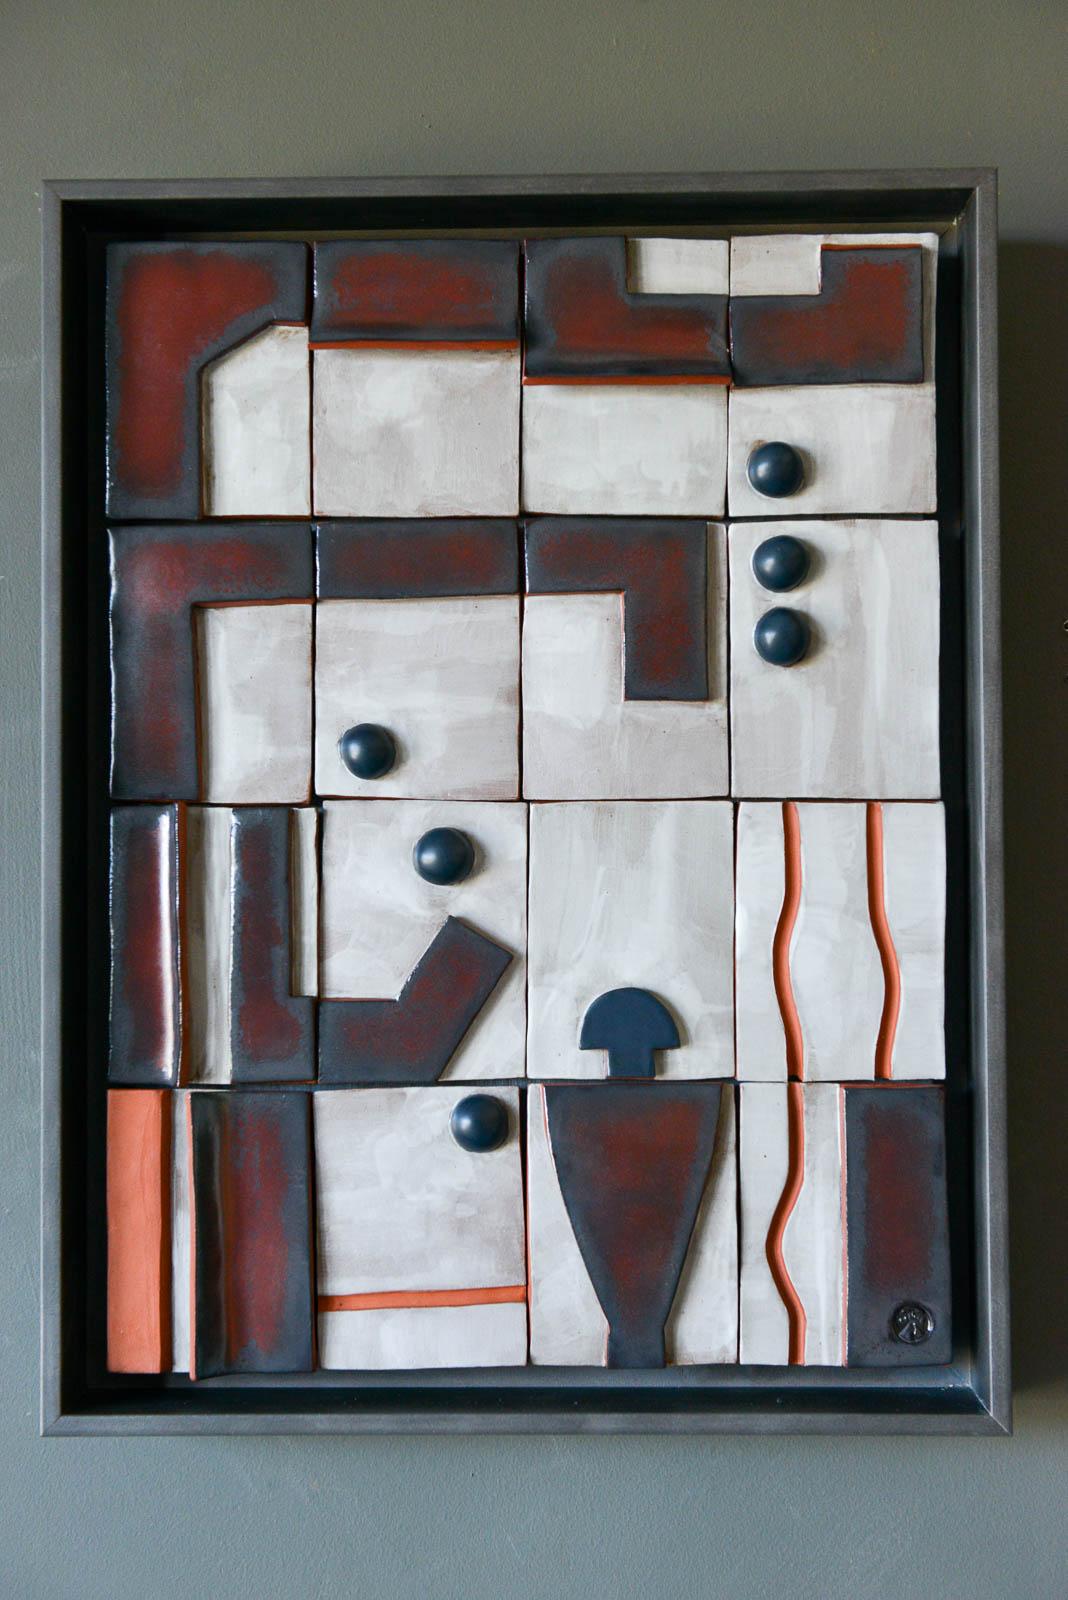 Ceramic Wall Relief by California Artist Adele Martin, 'Manzanita Tree-Night' Original one of a kind ceramic wall relief sculpture by California artist Adele Martin, each tile is handcrafted and individually created, glazed and mounted with a